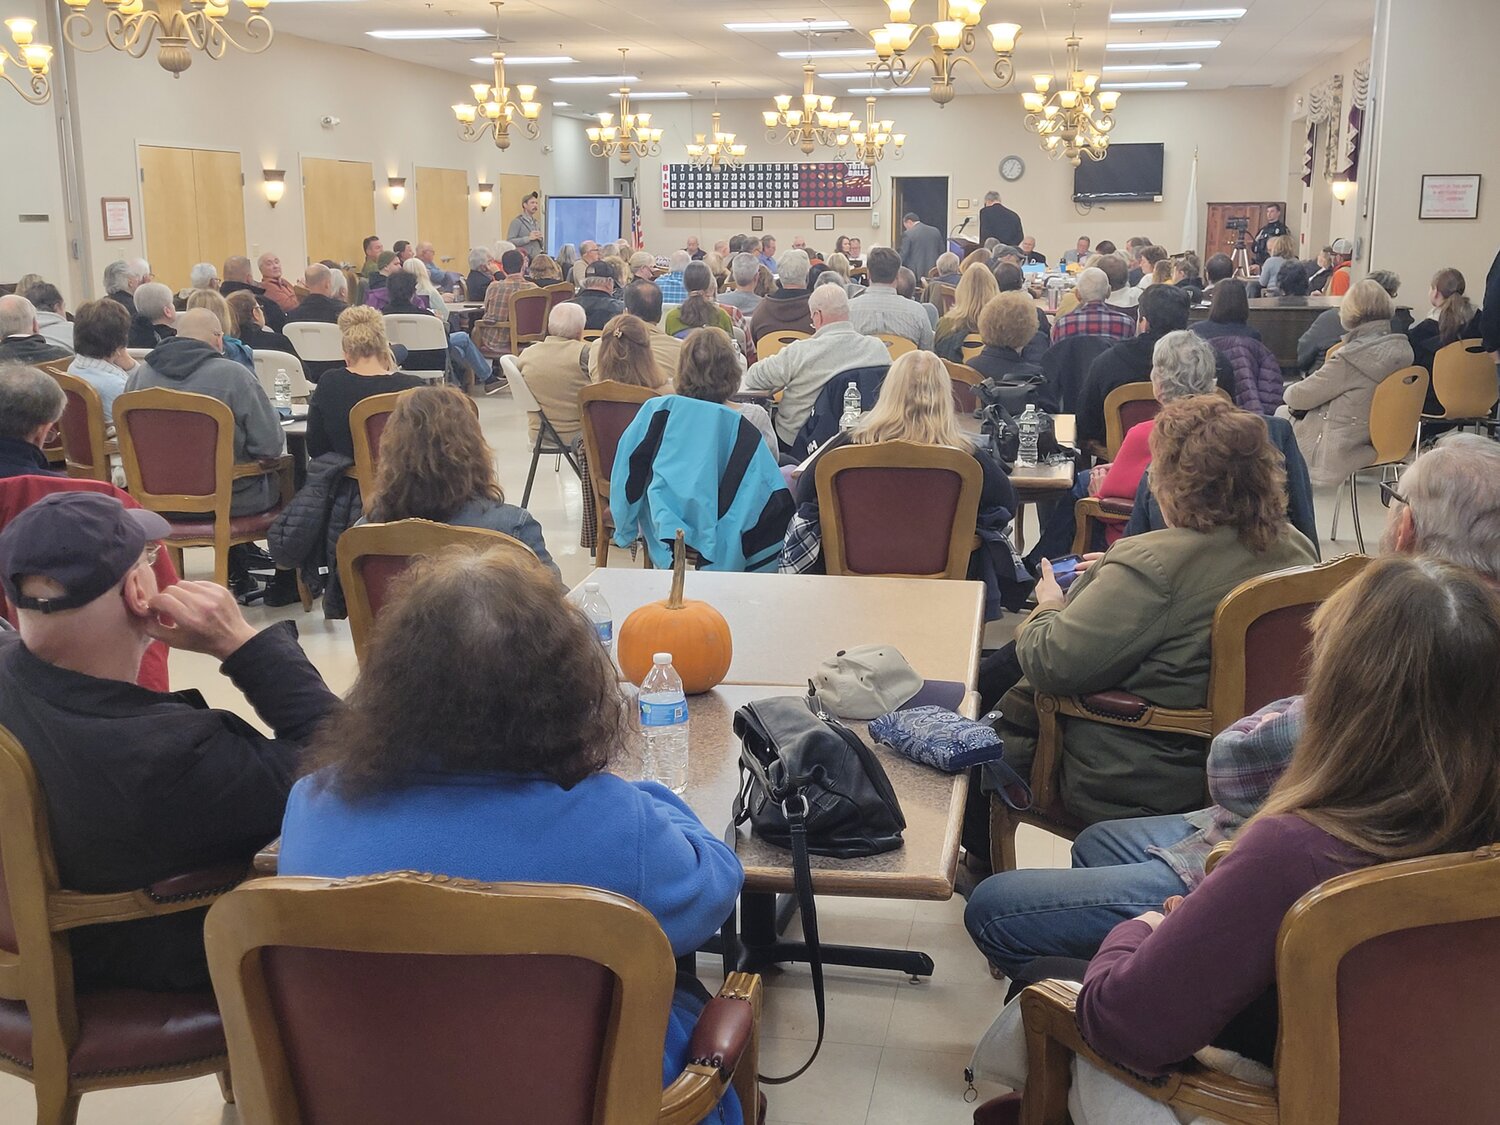 PACKED HOUSE: The Johnston Senior Center was packed with vocal opponents of a solar field pitched for one of the town’s residential neighborhoods.